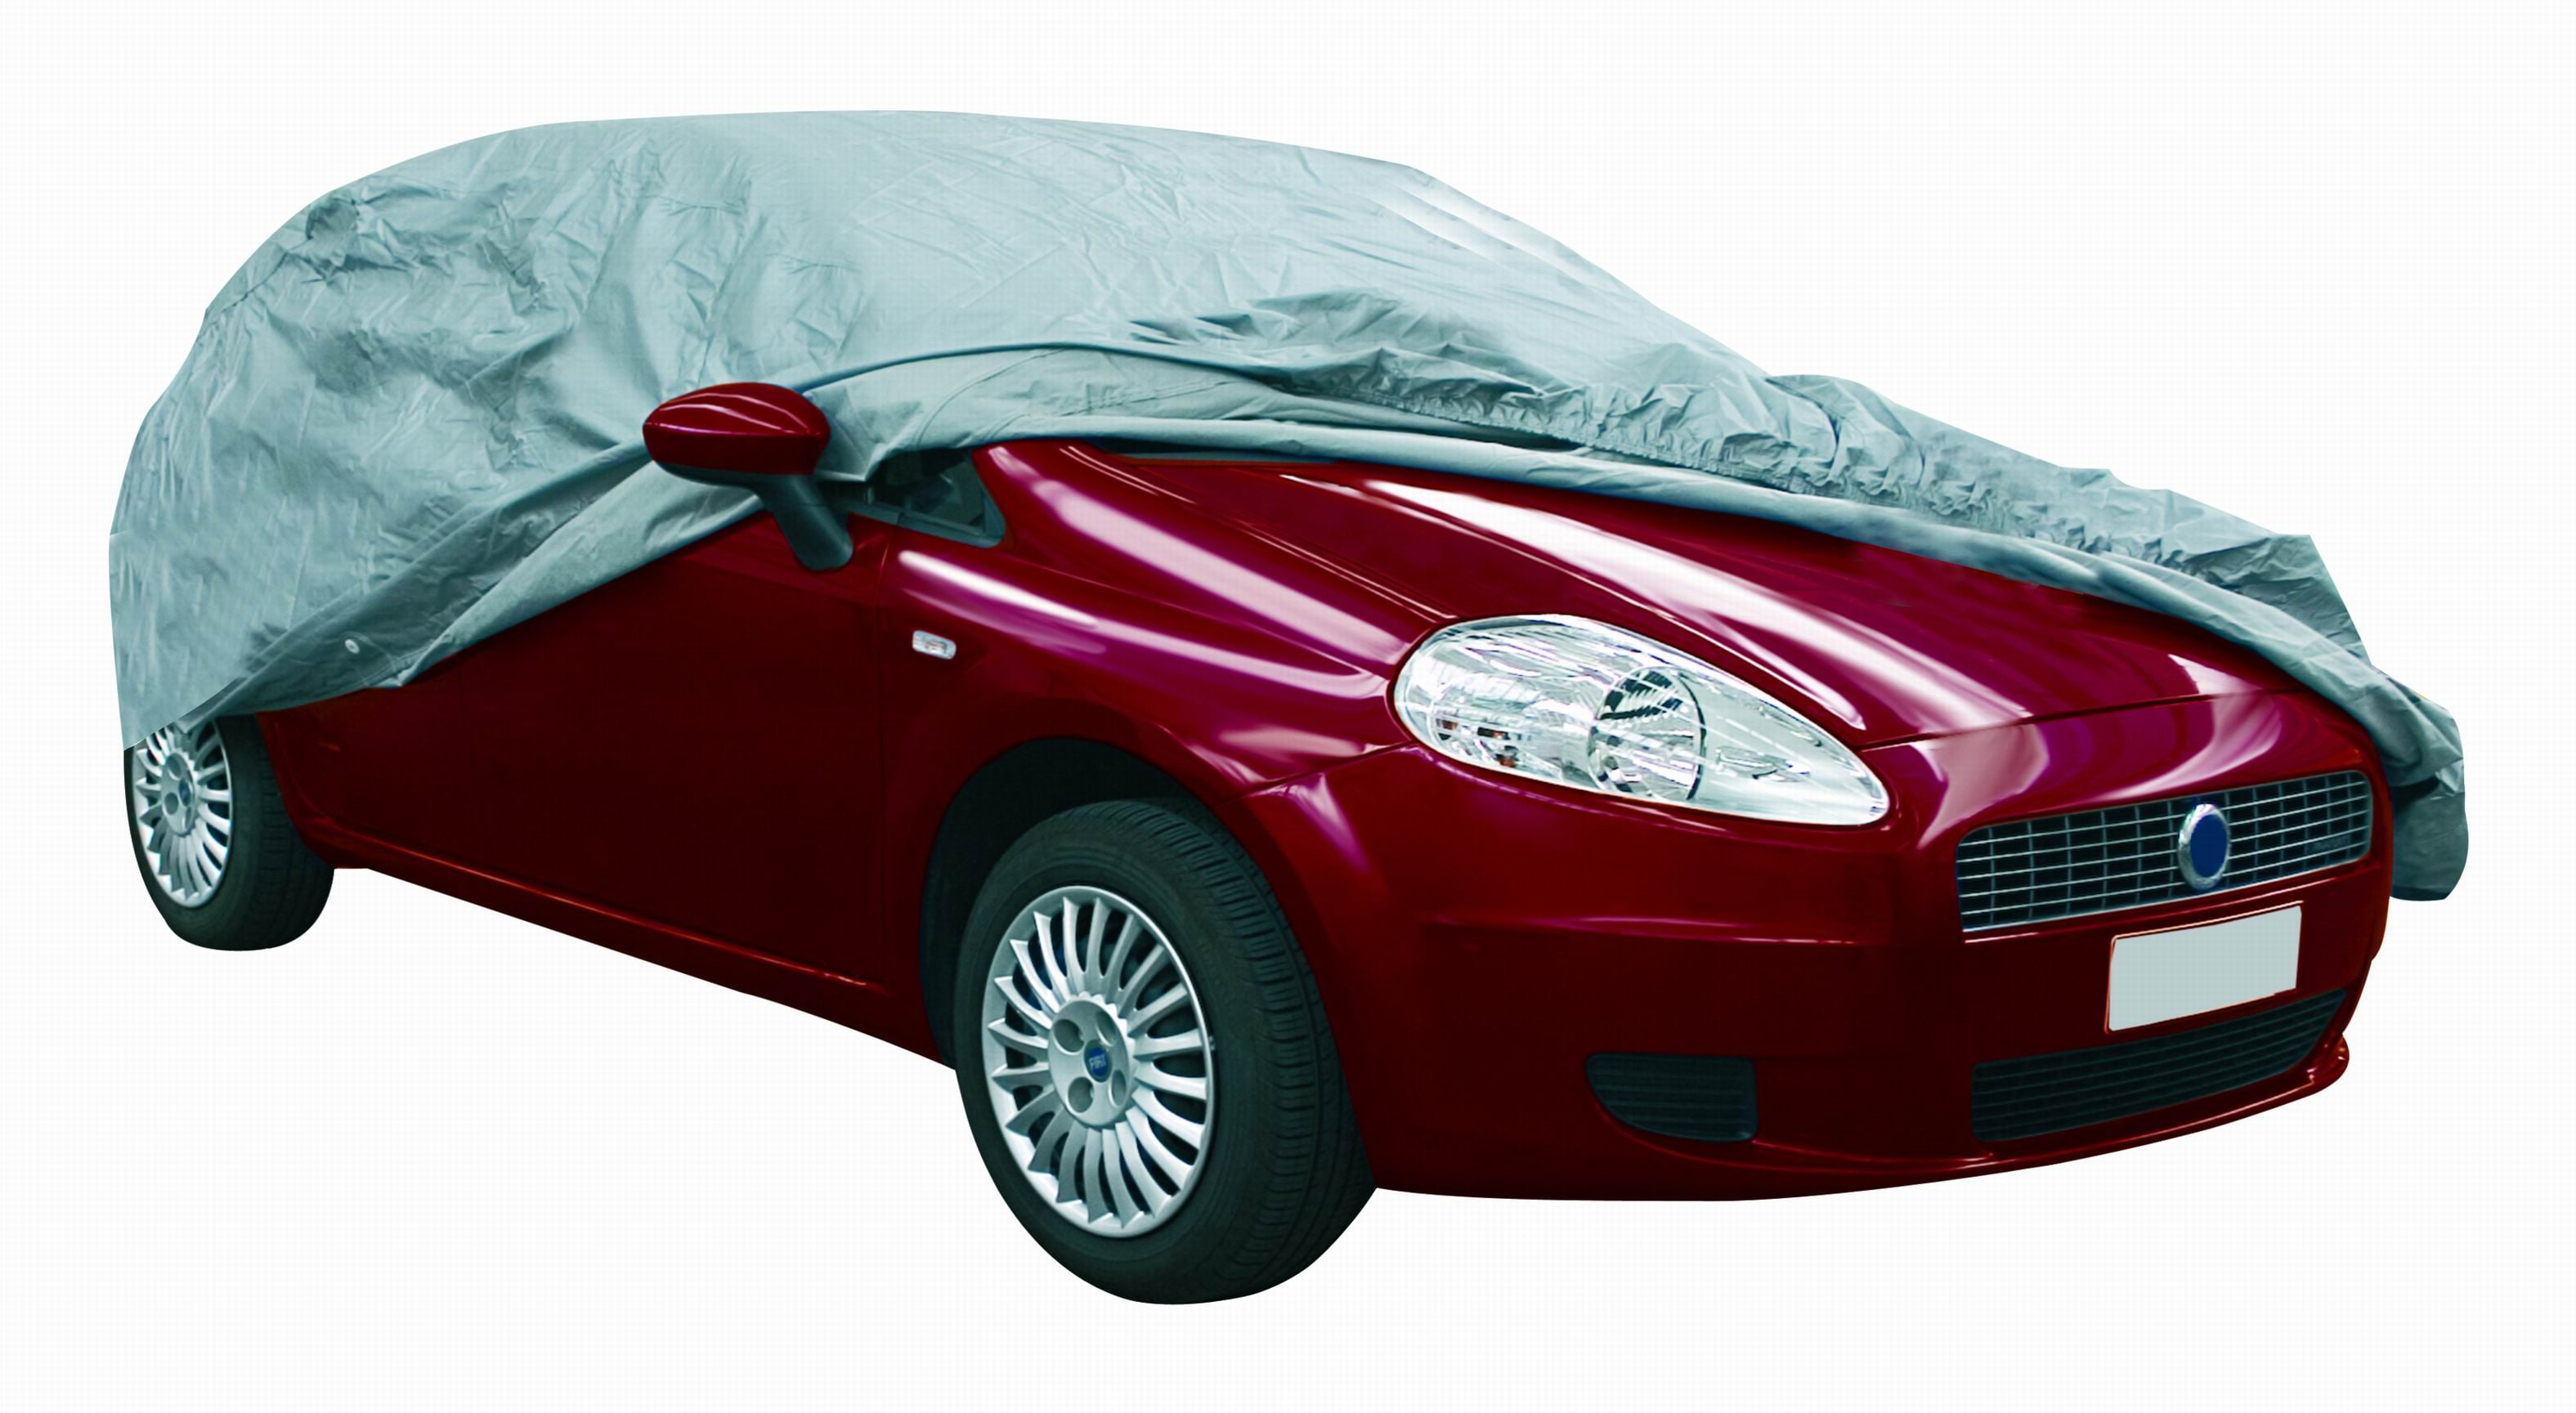 Top Rated Products in Car Covers & Car Protection